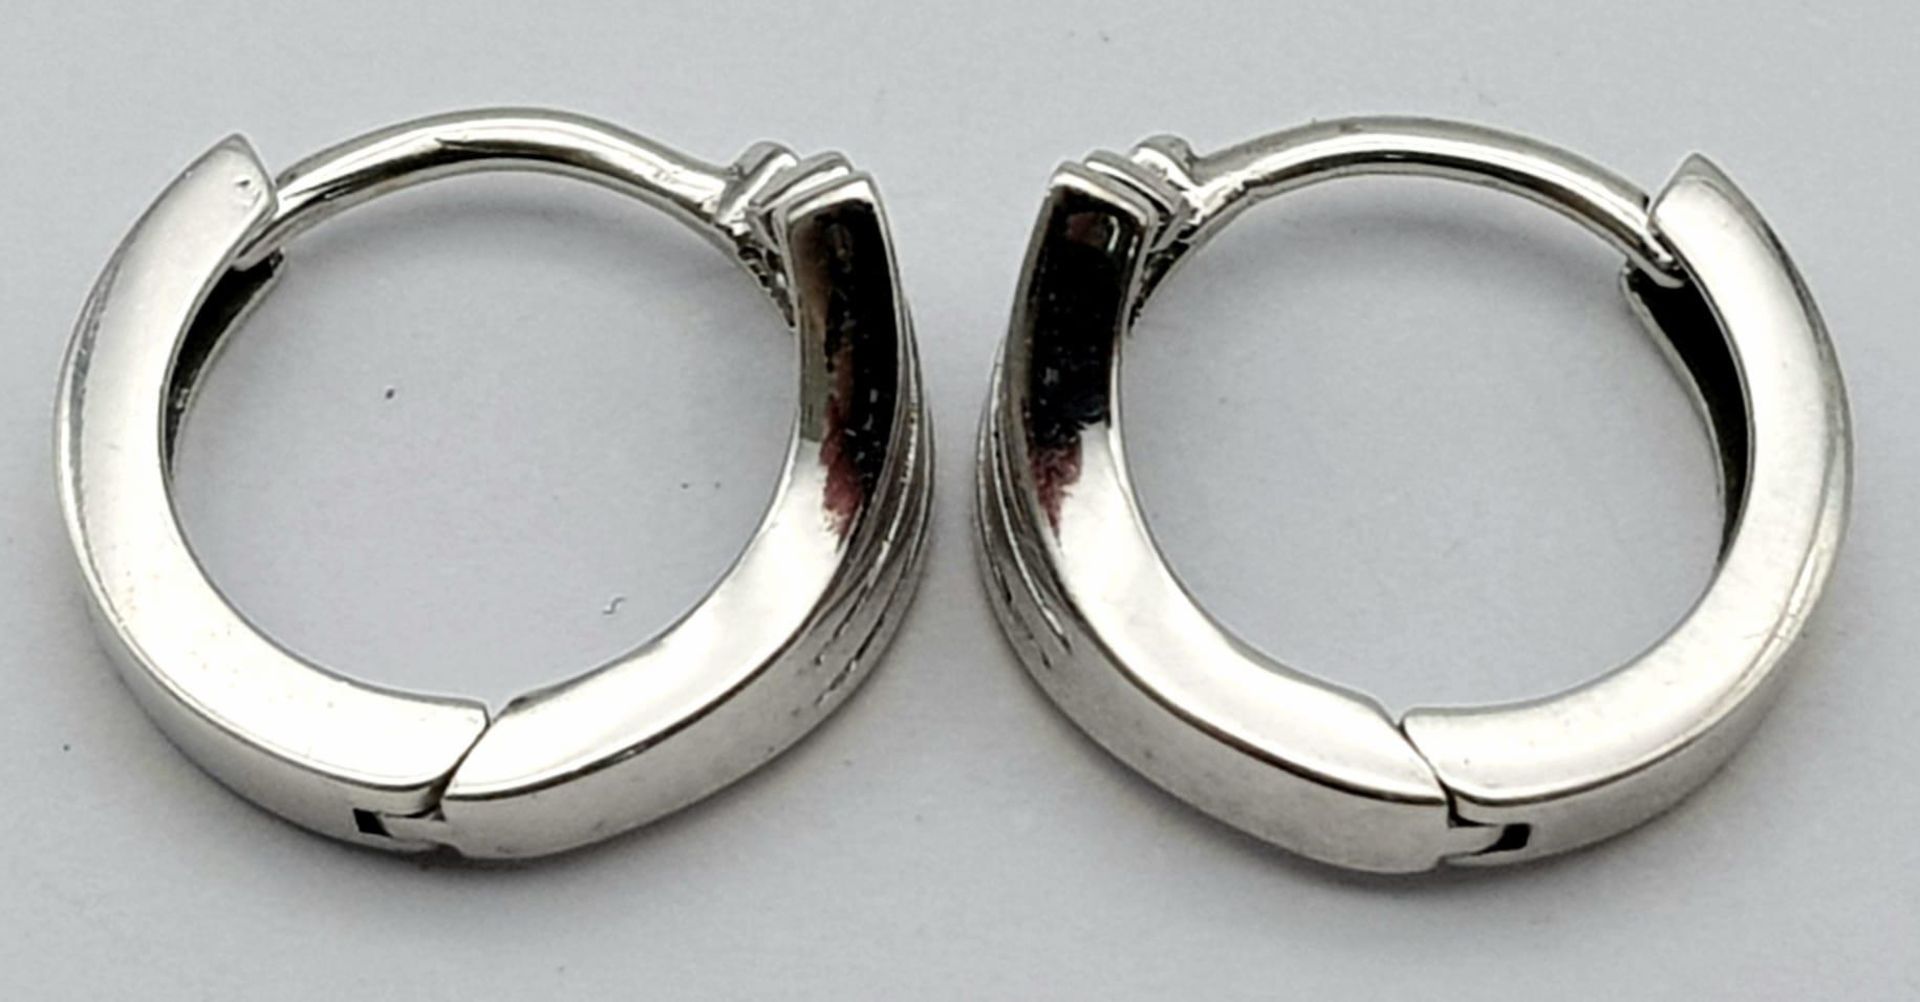 Pair of 18K White Gold CZ Mini Hoops earrings, 3.1g total weight - Image 4 of 6